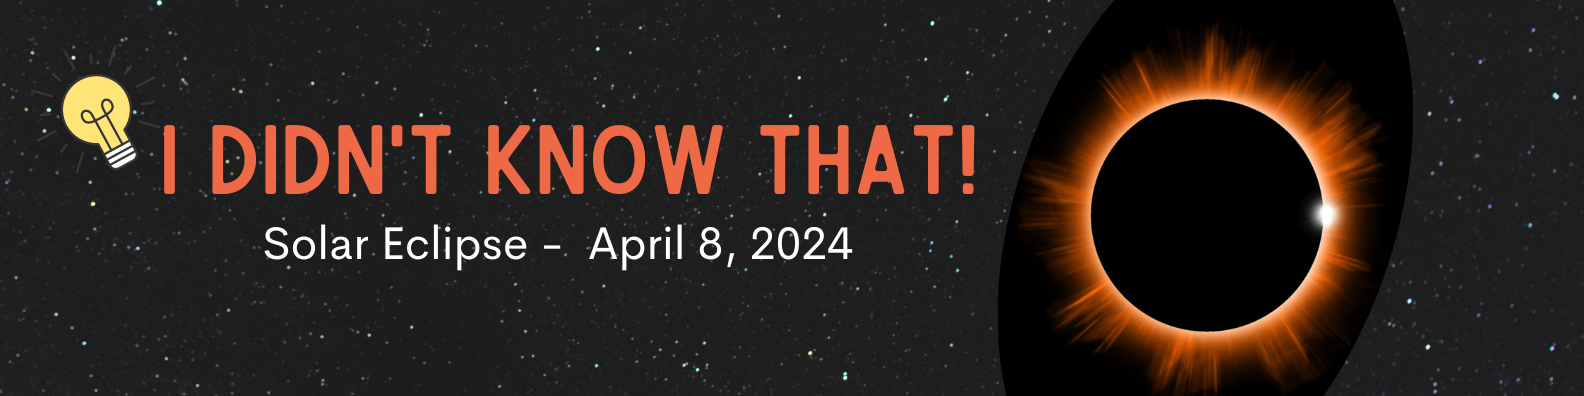 a title banner for I Didn't Know That! Solar Eclipse - April 8, 2024